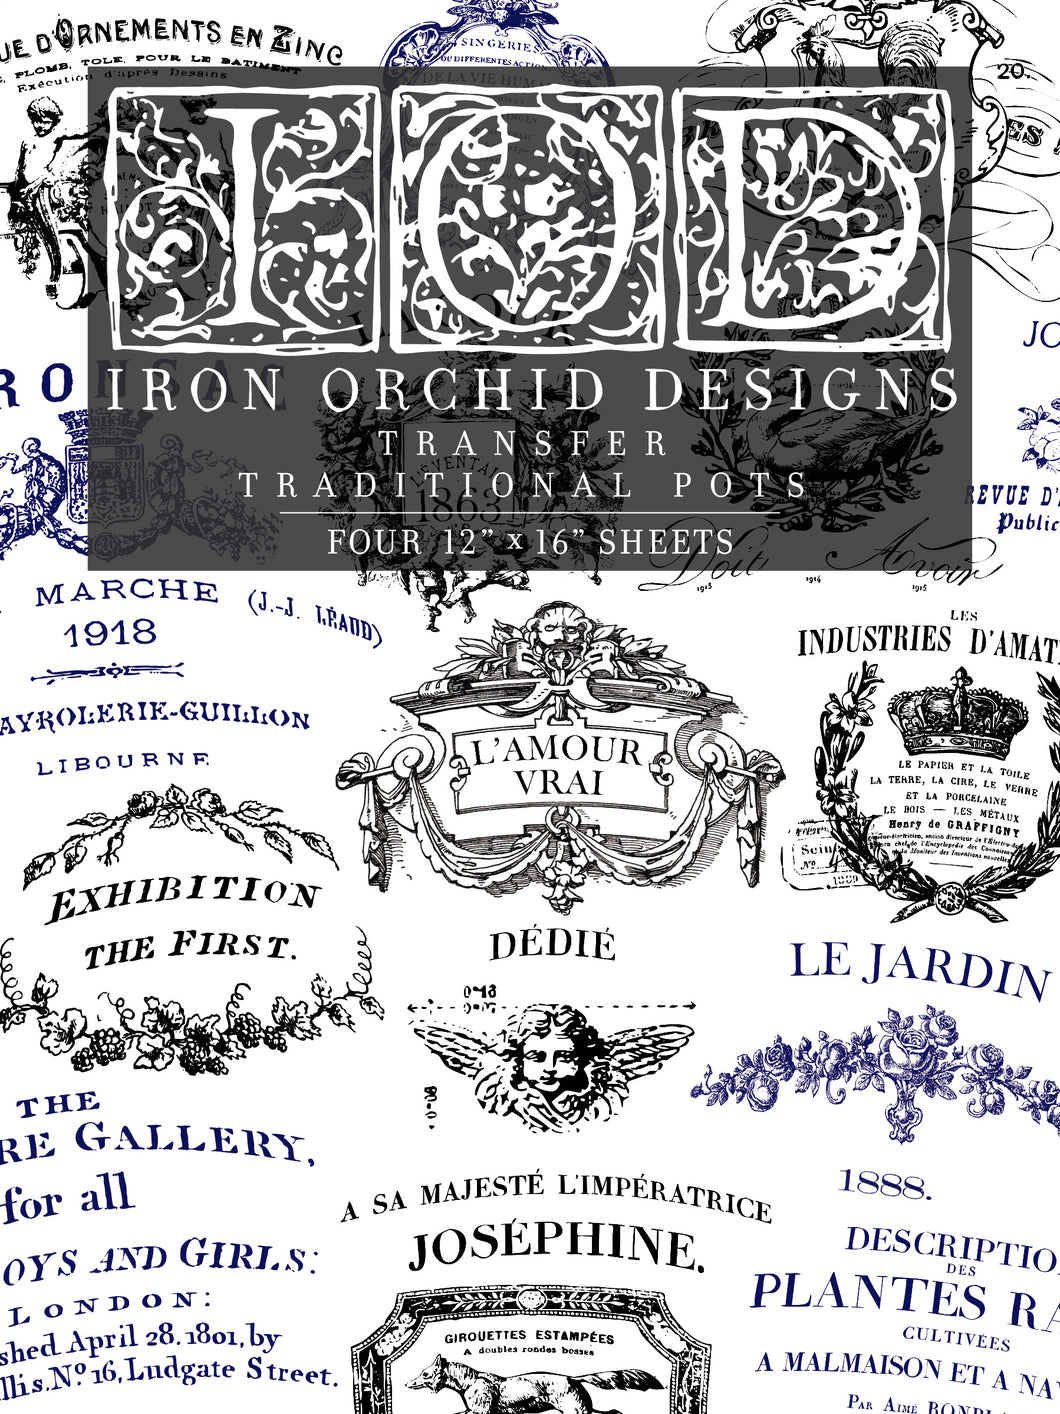 Traditional Pots Transfer by IOD Iron Orchid Designs New